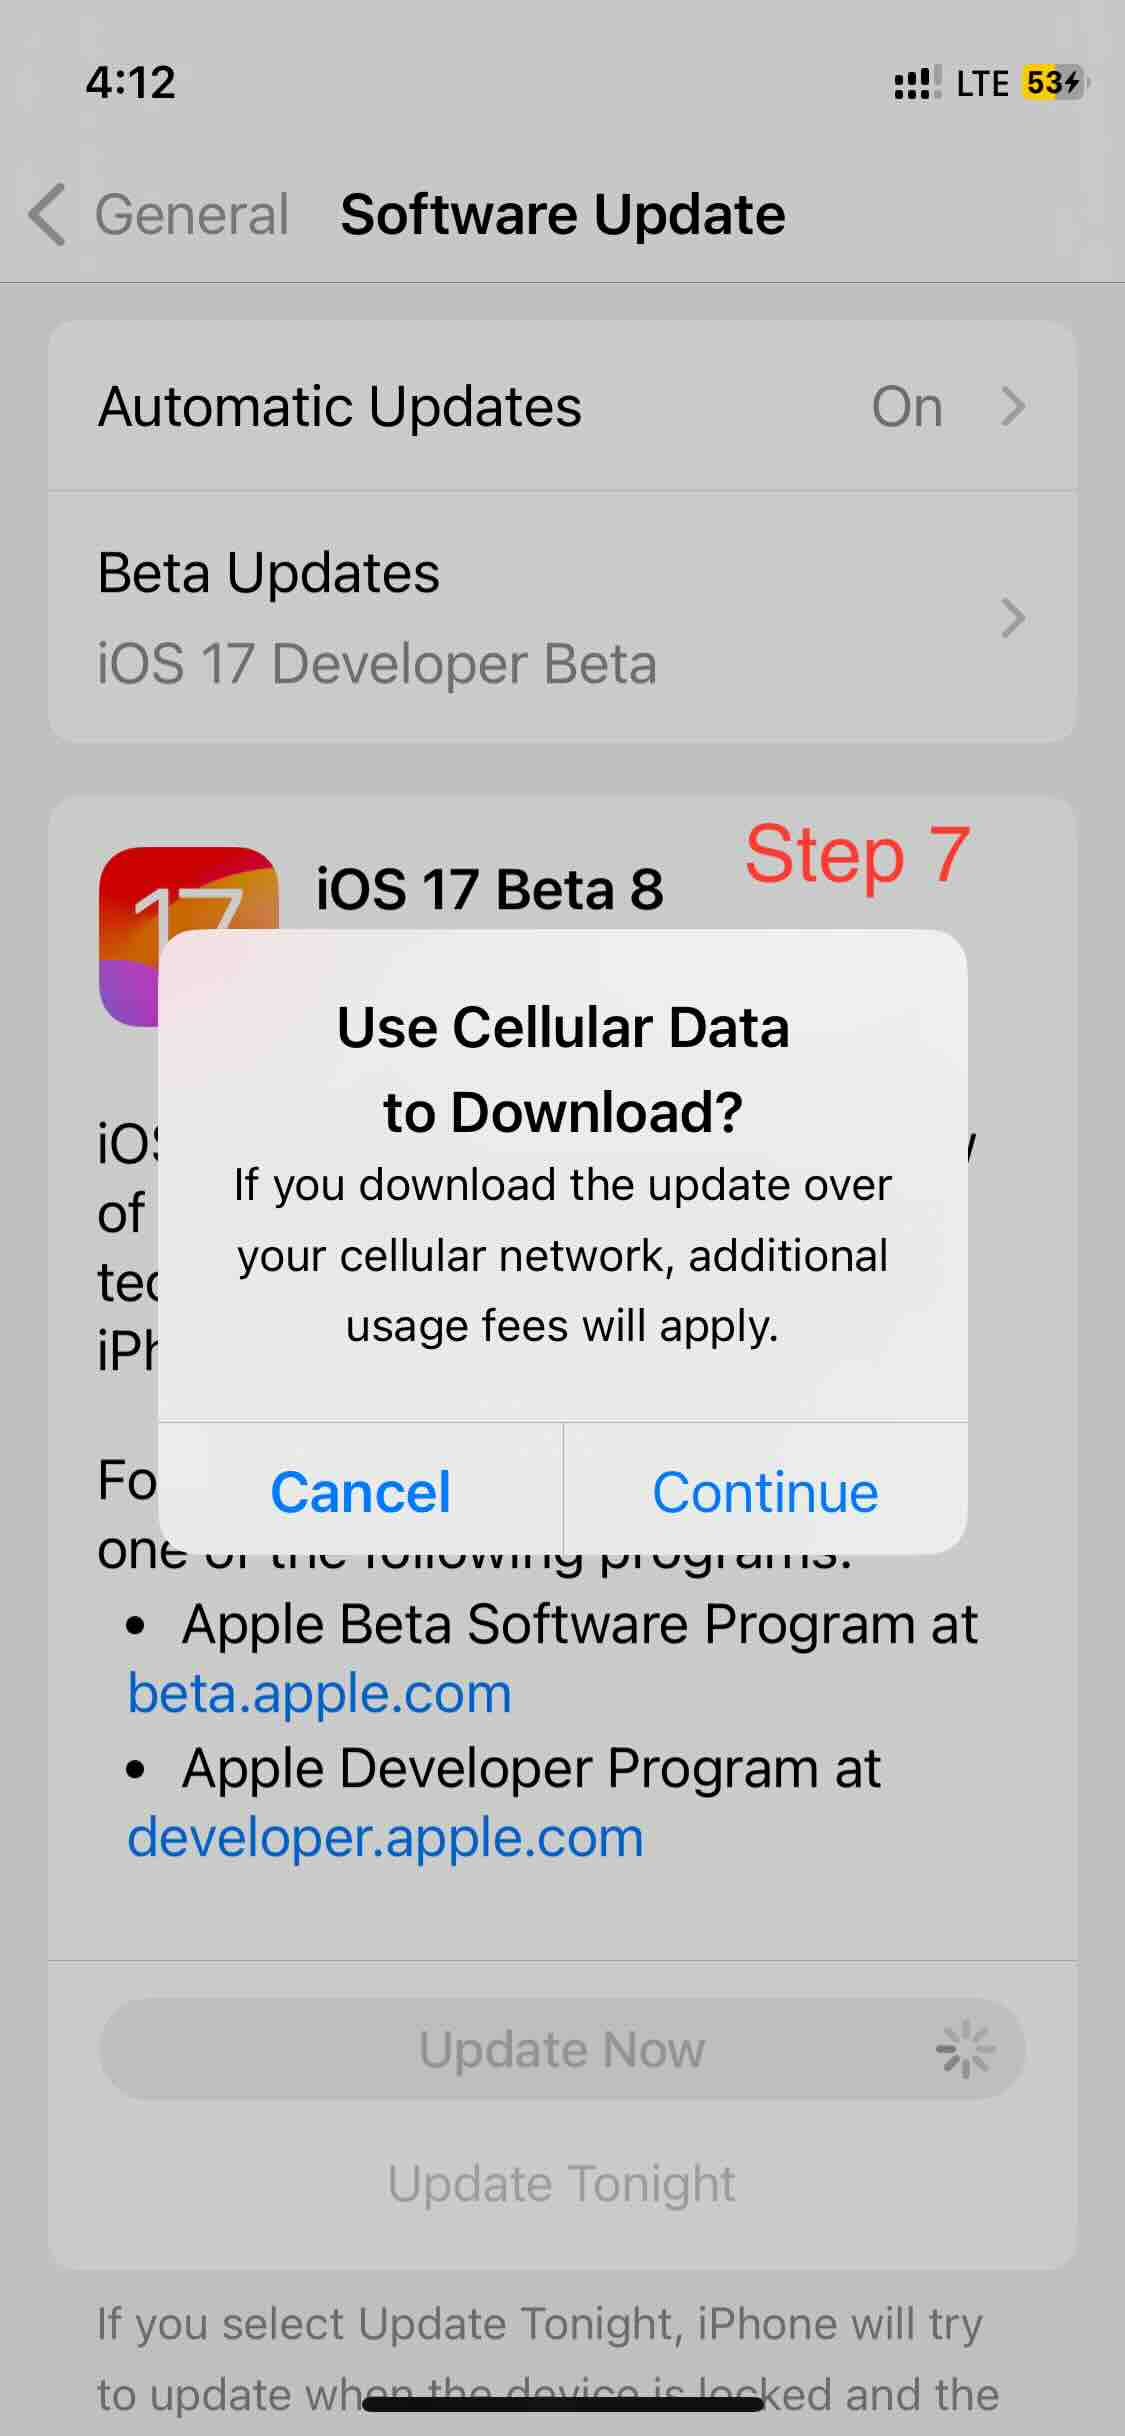 Step 7 - If Downloading over Cellular